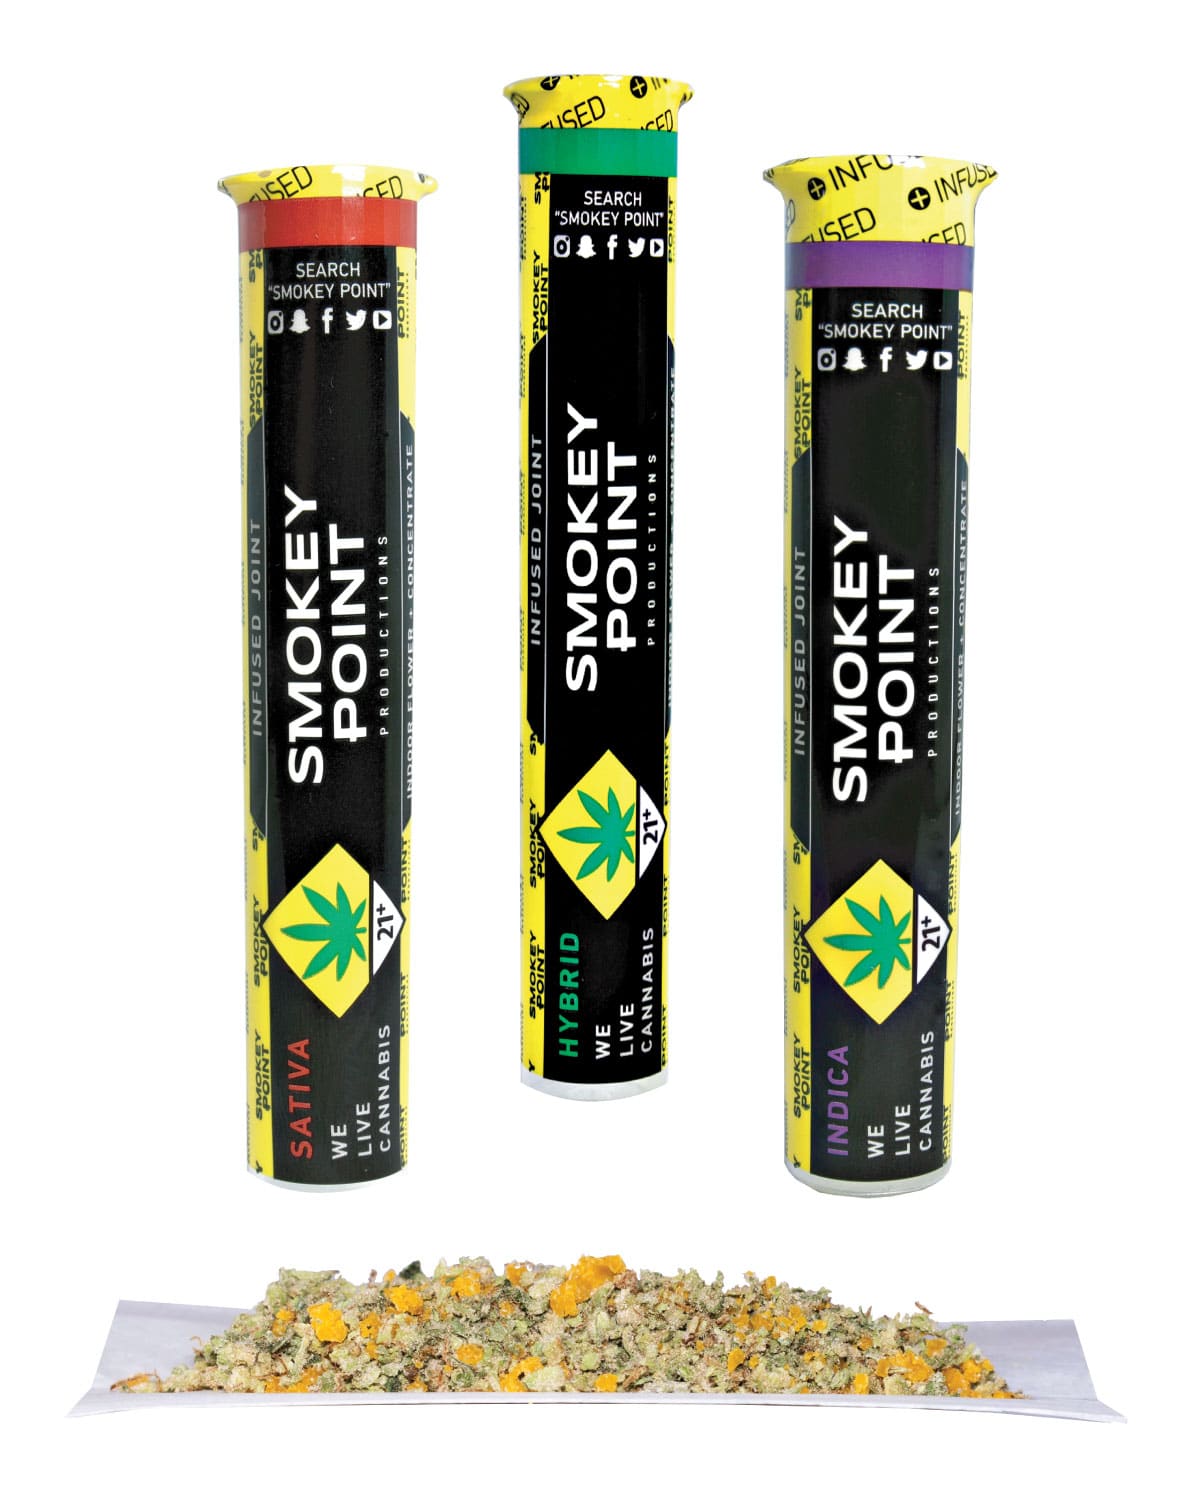 Smokey Point Productions produces some of our favorite infused joints made with high quality buds and potent shatter. These joints pack a serious punch, smoke responsibly! Visit us in East Bremerton to learn more.